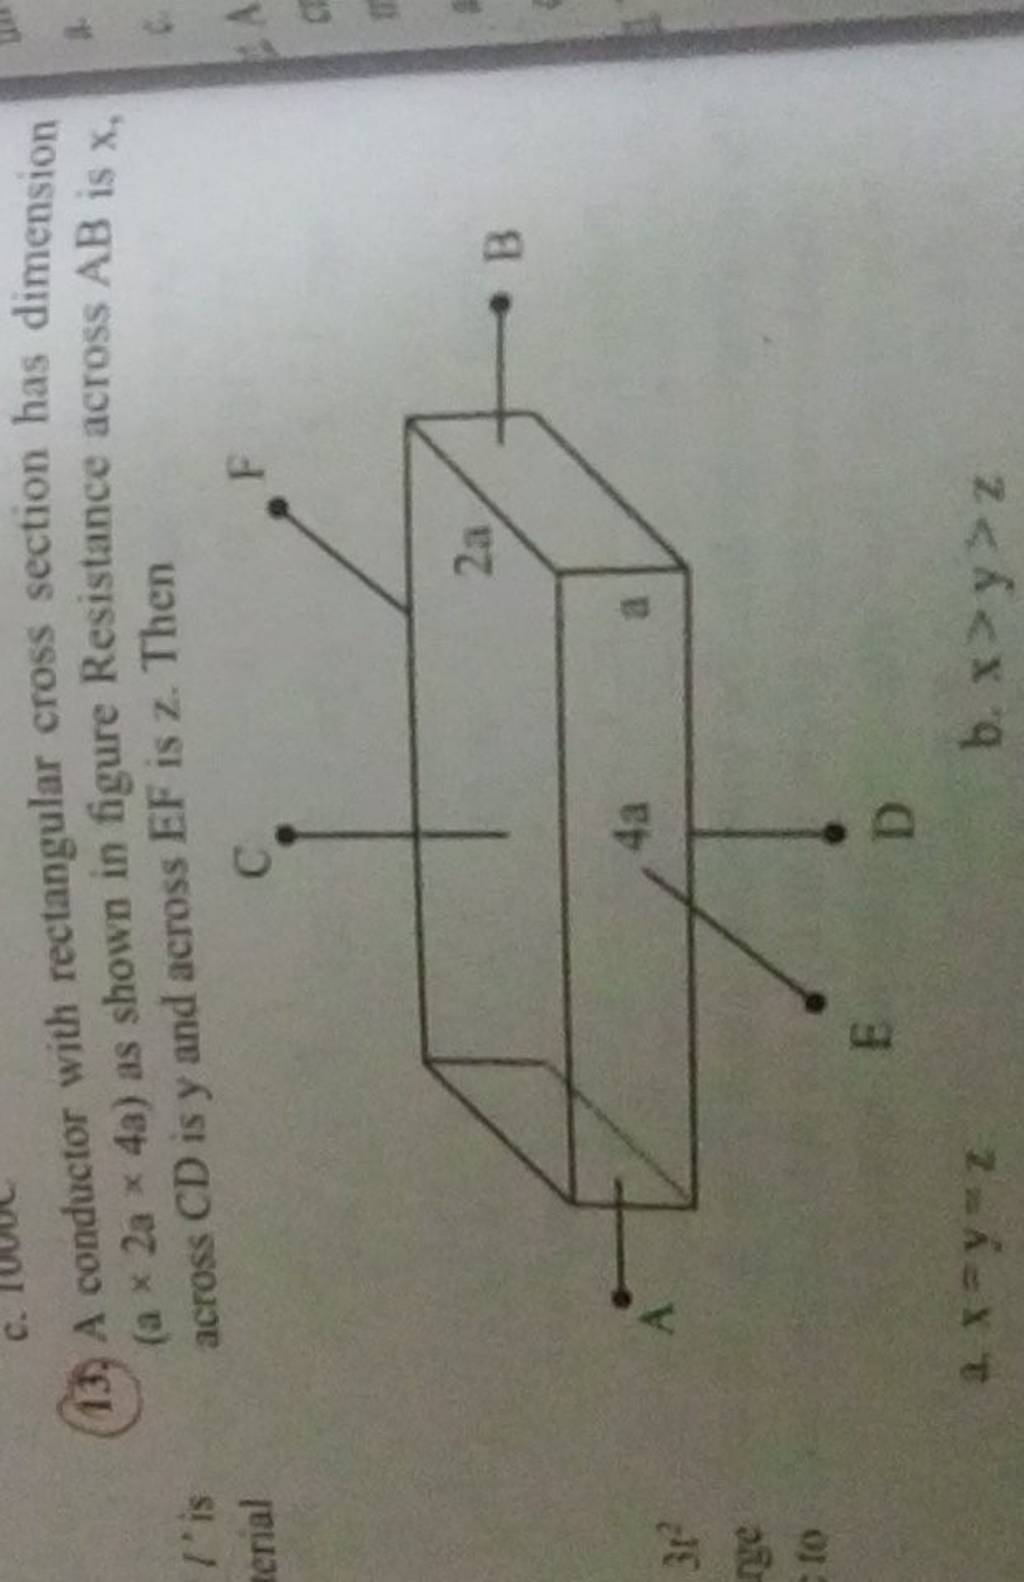 (13.) A conductor with rectangular cross section has dimension (a×2a×4